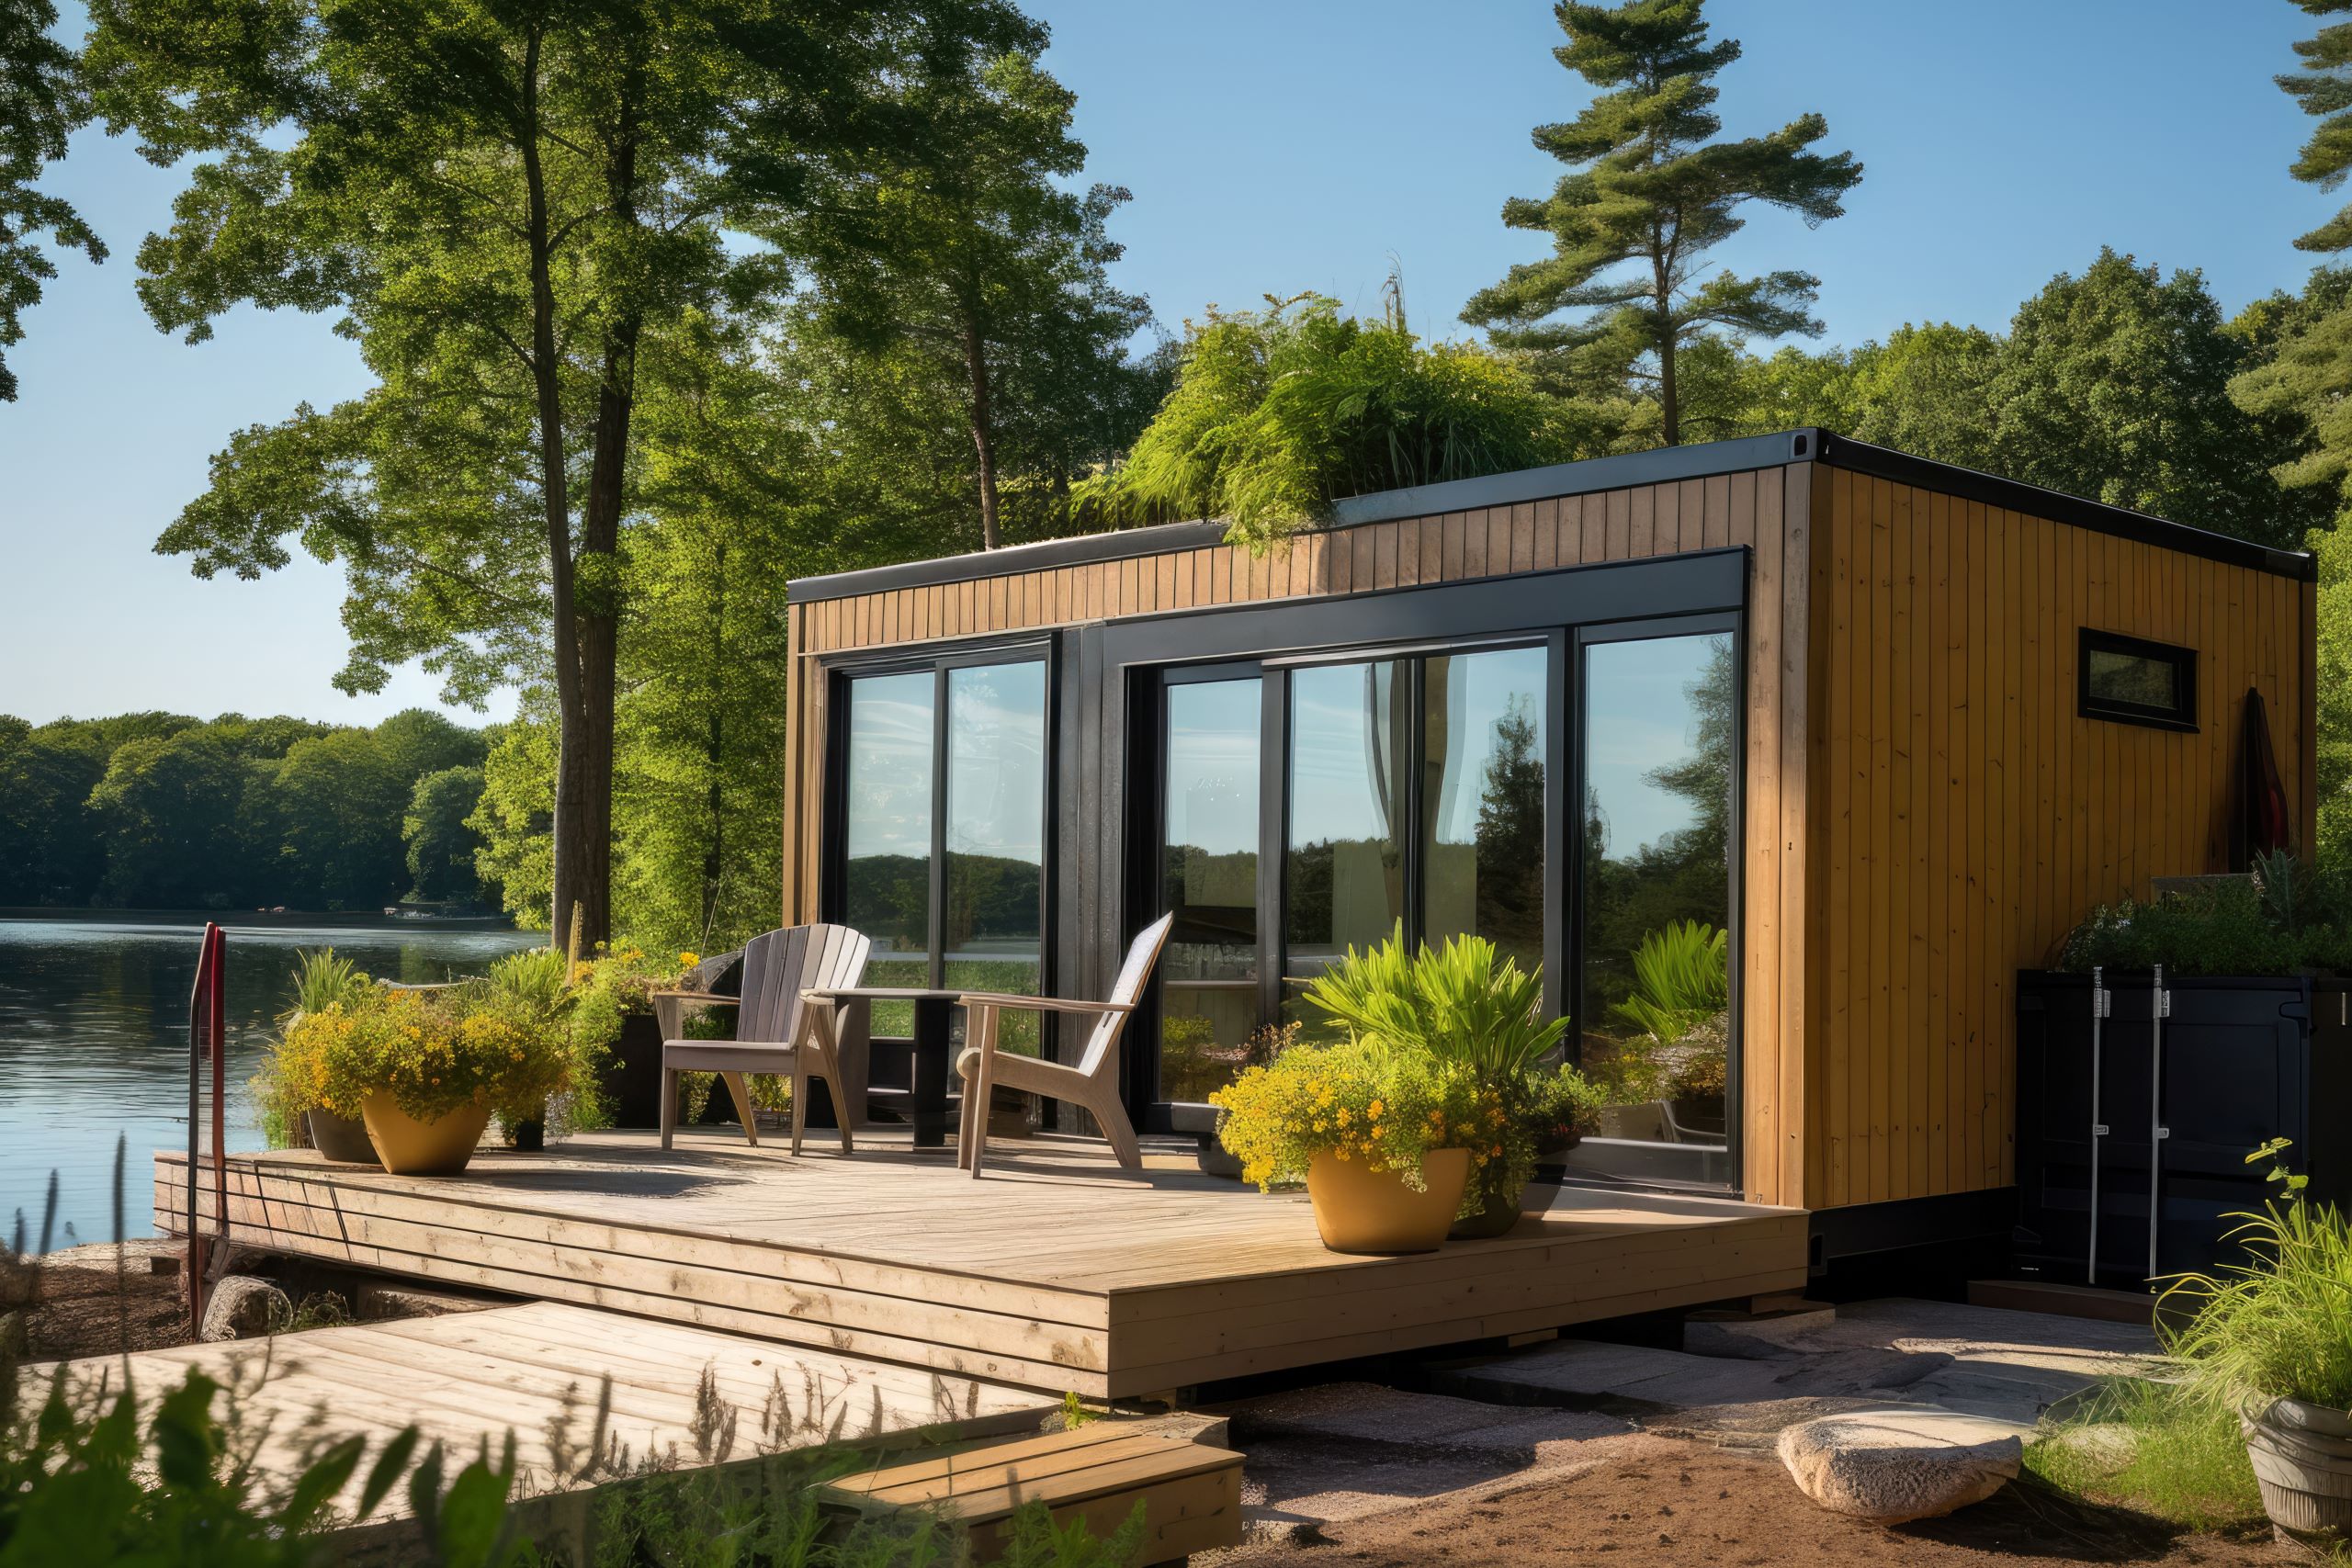 Tiny homes are emerging as a solution to housing affordability